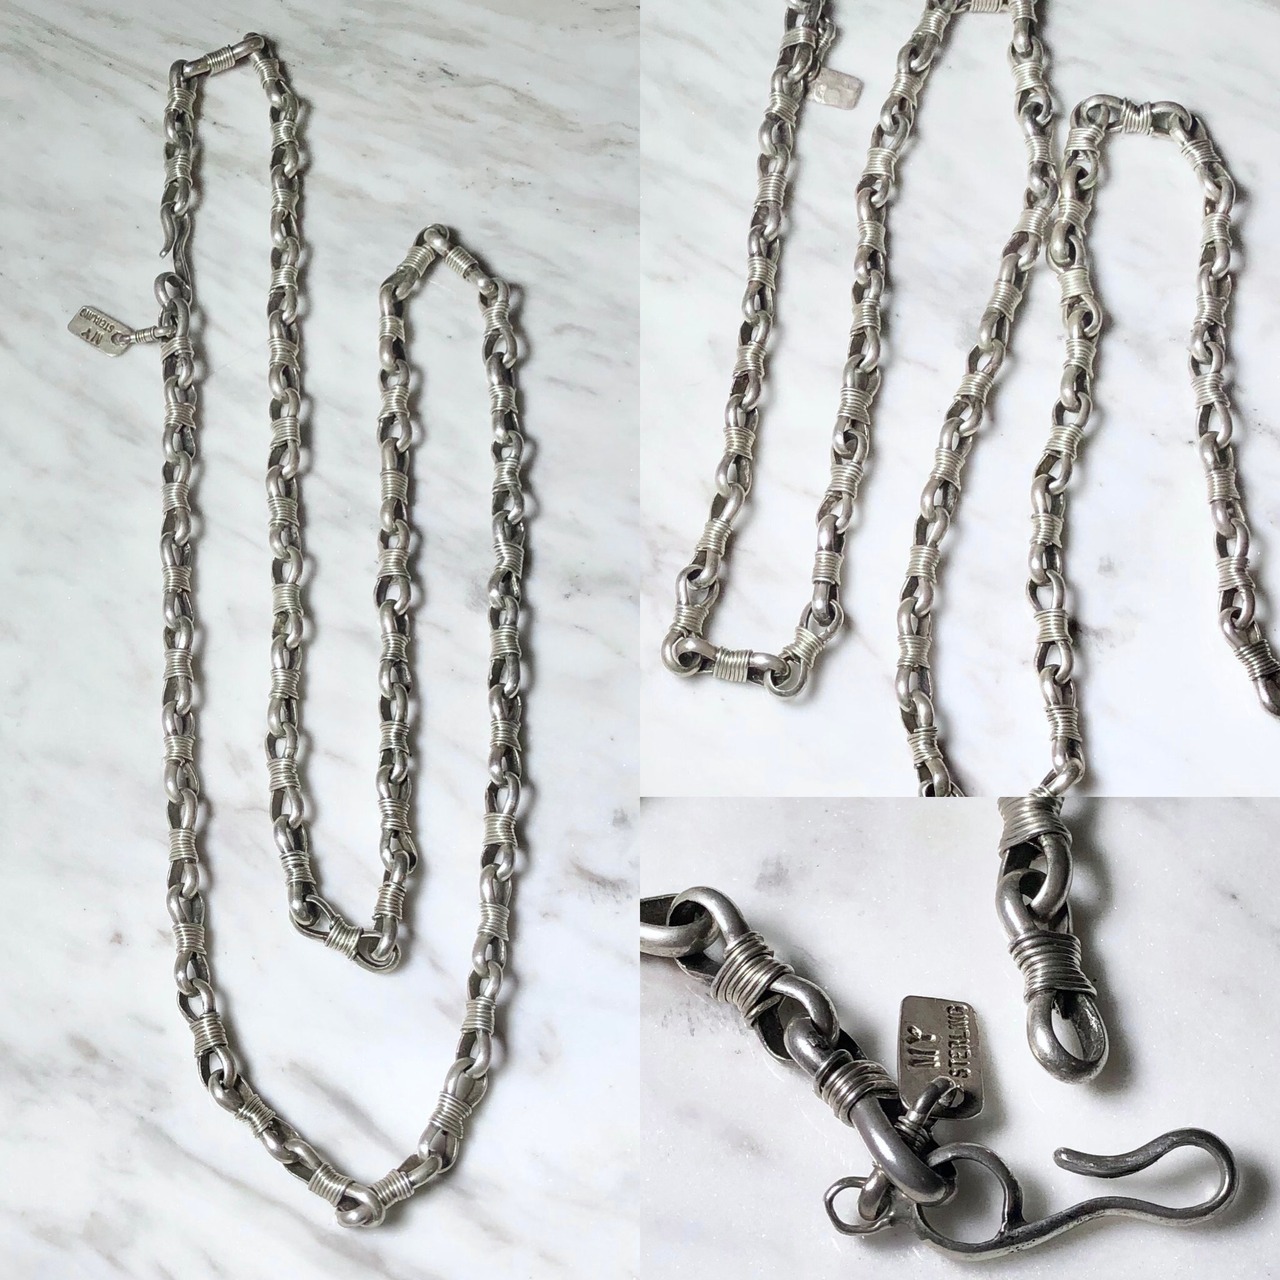 MARK YELLOWHOUSE heavy gauge silver chain necklace